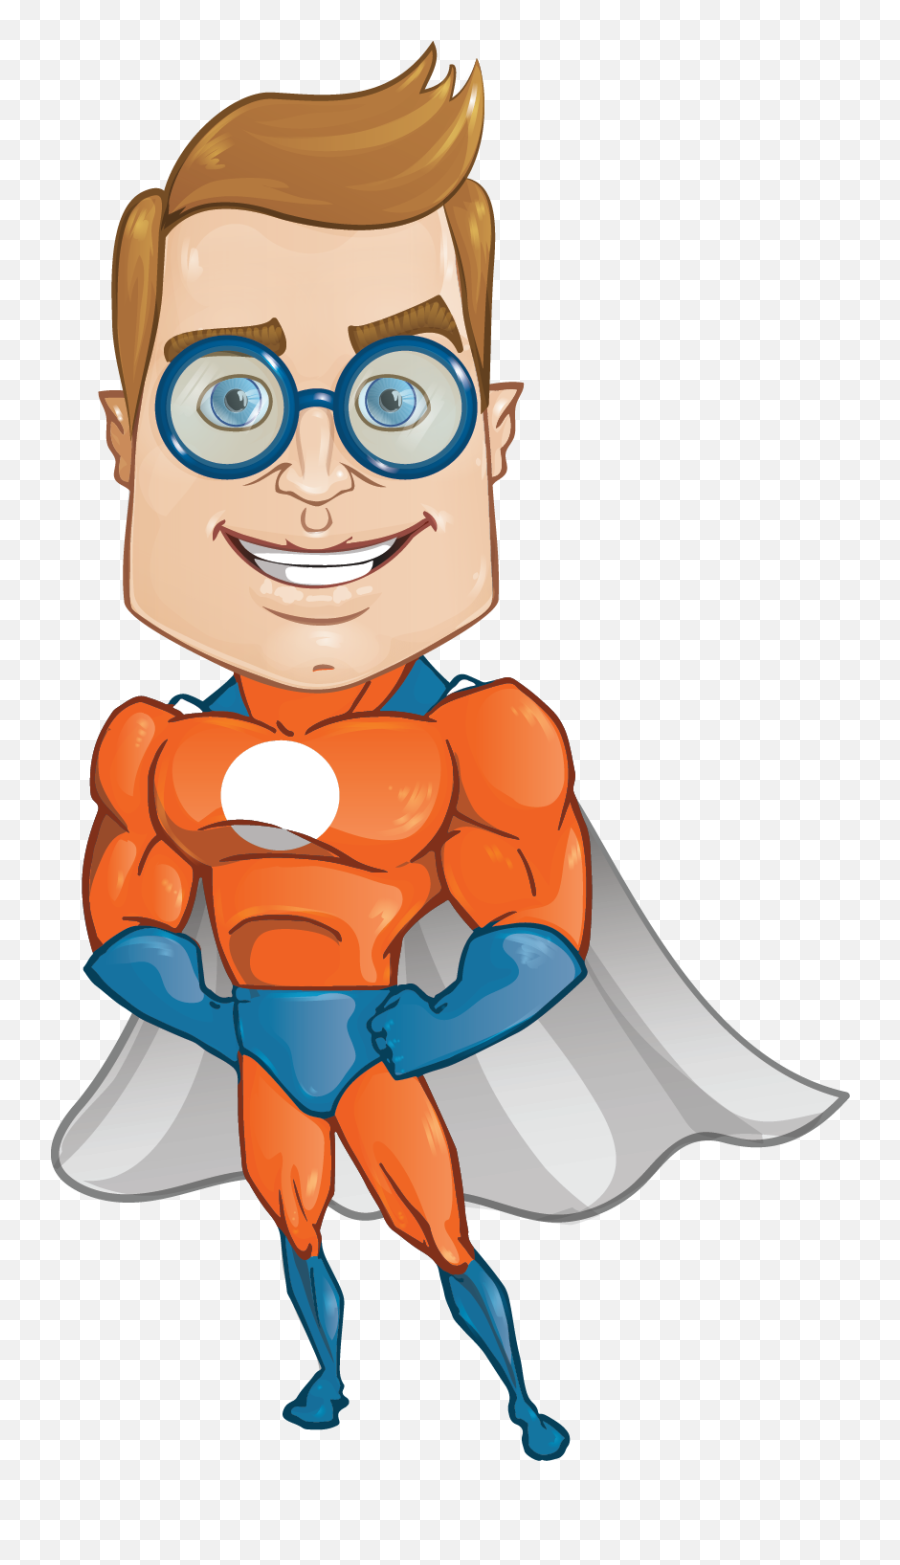 Download Superhero To Use Png Images Clipart Free - Cartoon Superhero With Glasses,Super Heroes Png